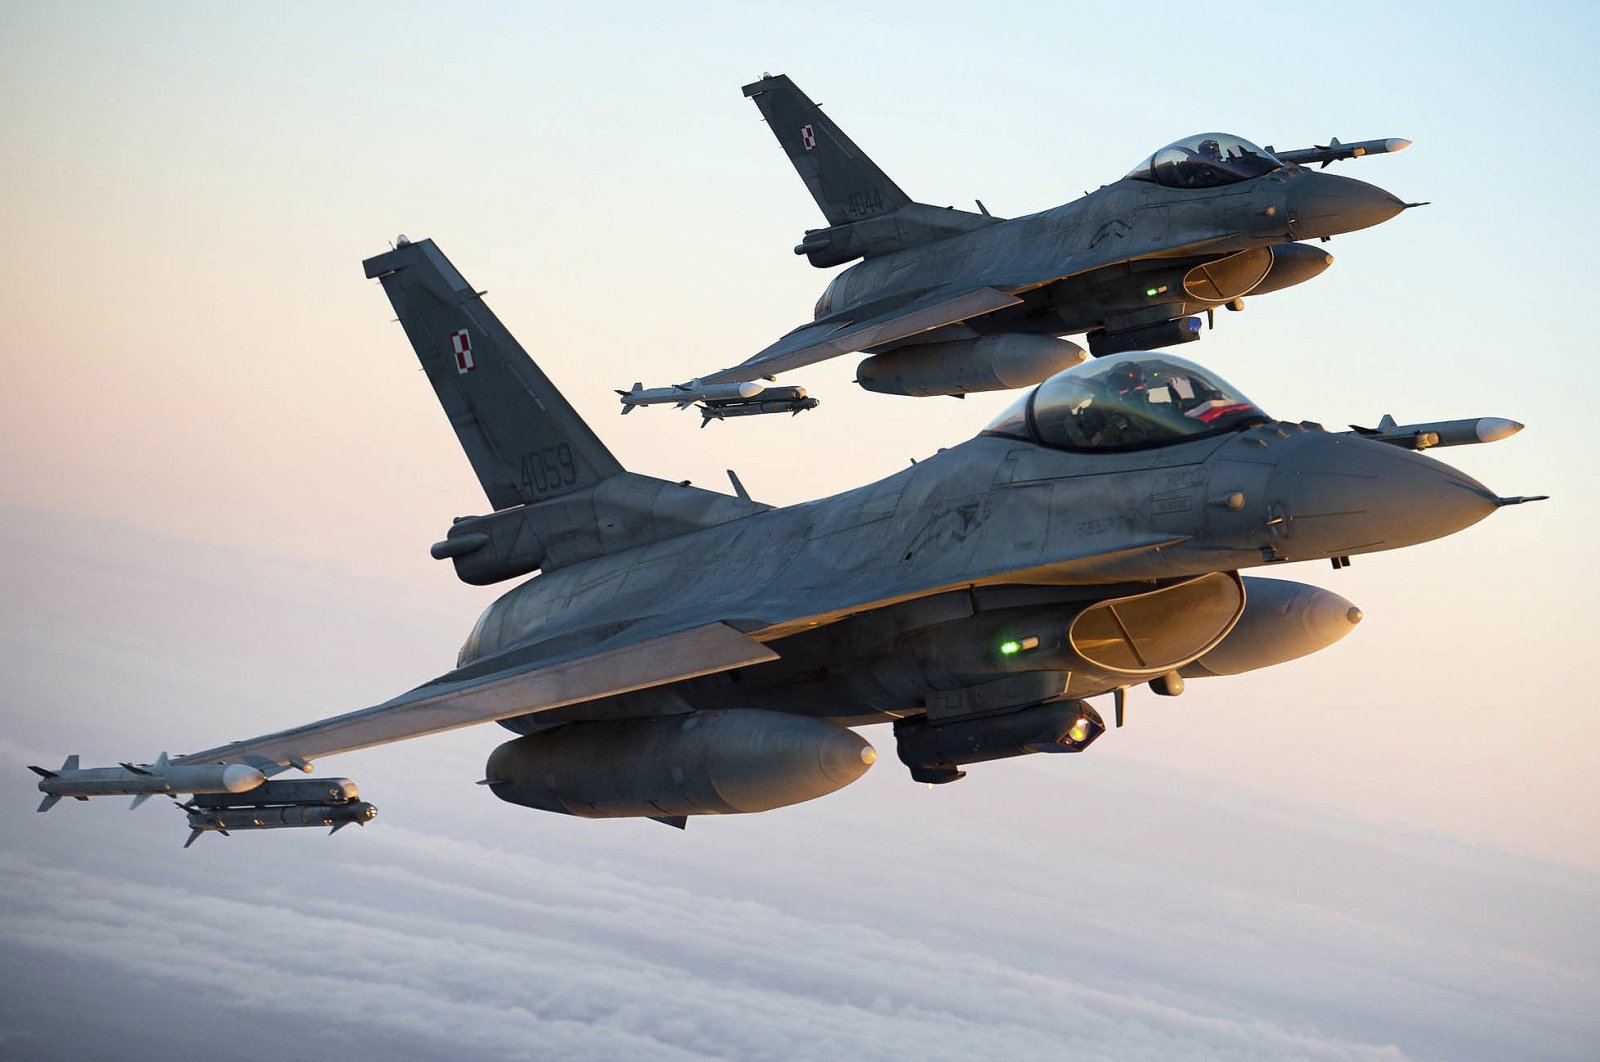 Polish Air Force F-16 fighter jets participate in a NATO mission over Lithuania, Jan. 25, 2022. (AP Photo)